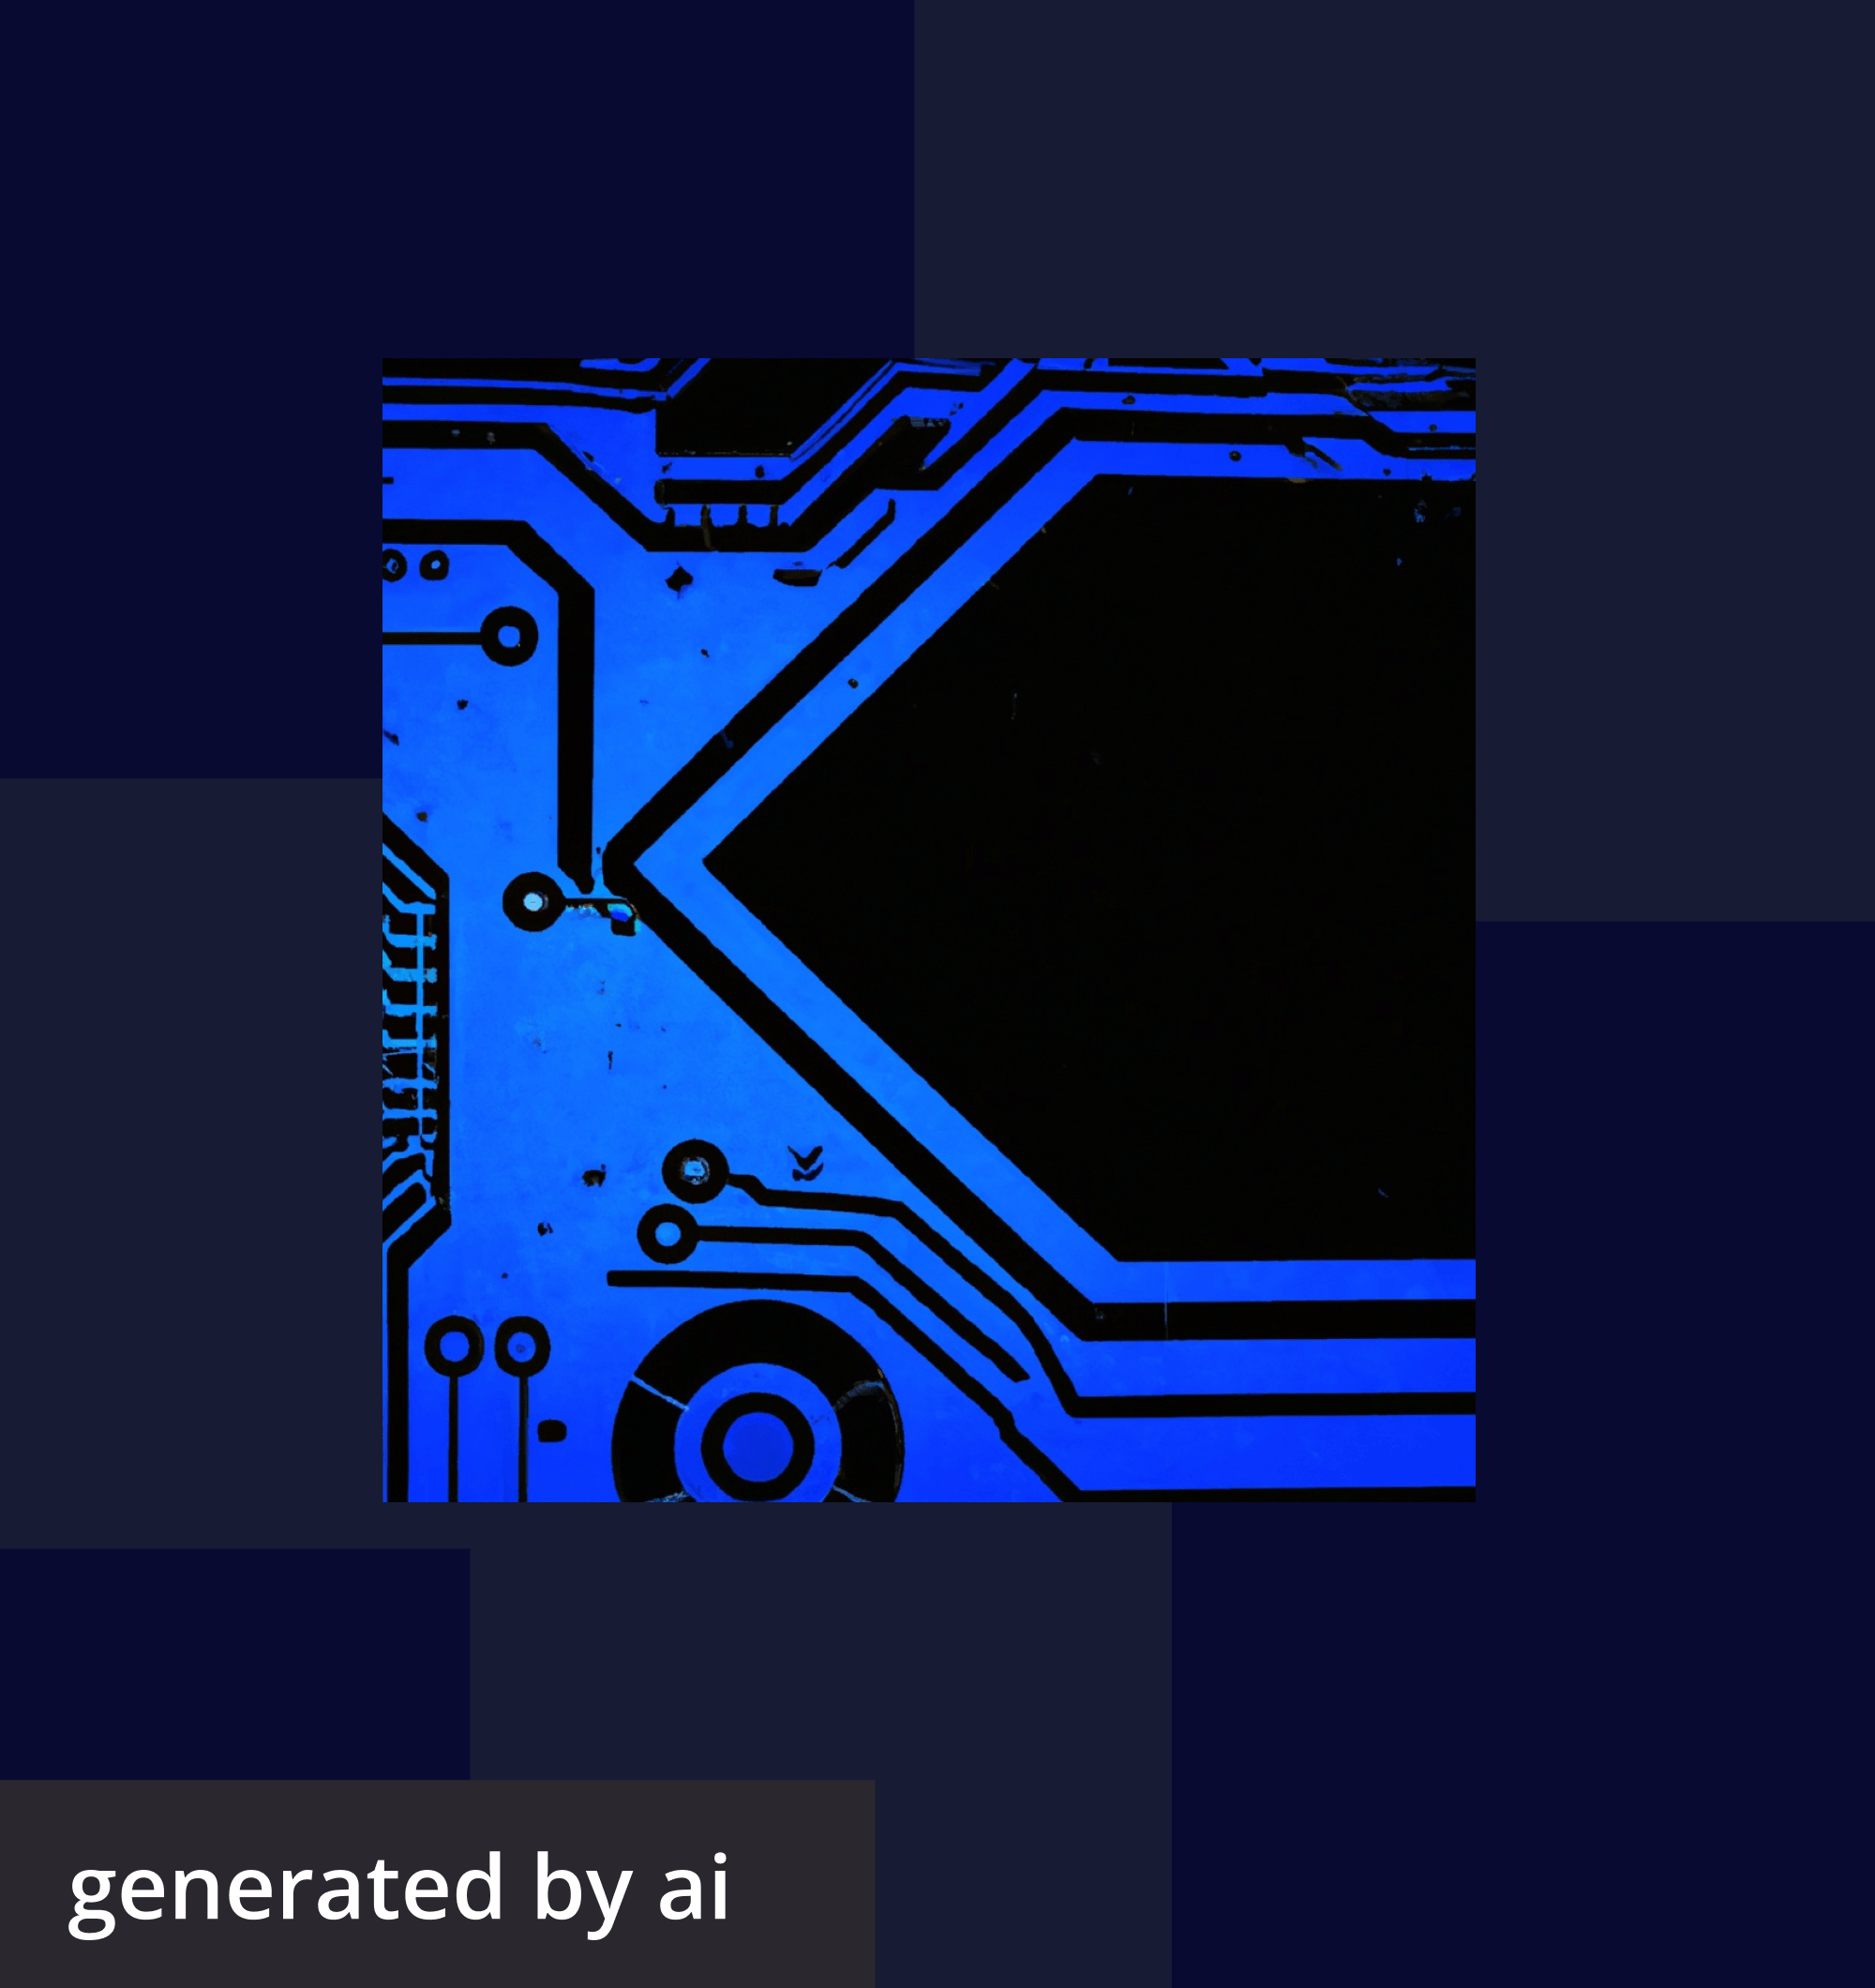 An AI-generated image of computer hardware in blue over a black background